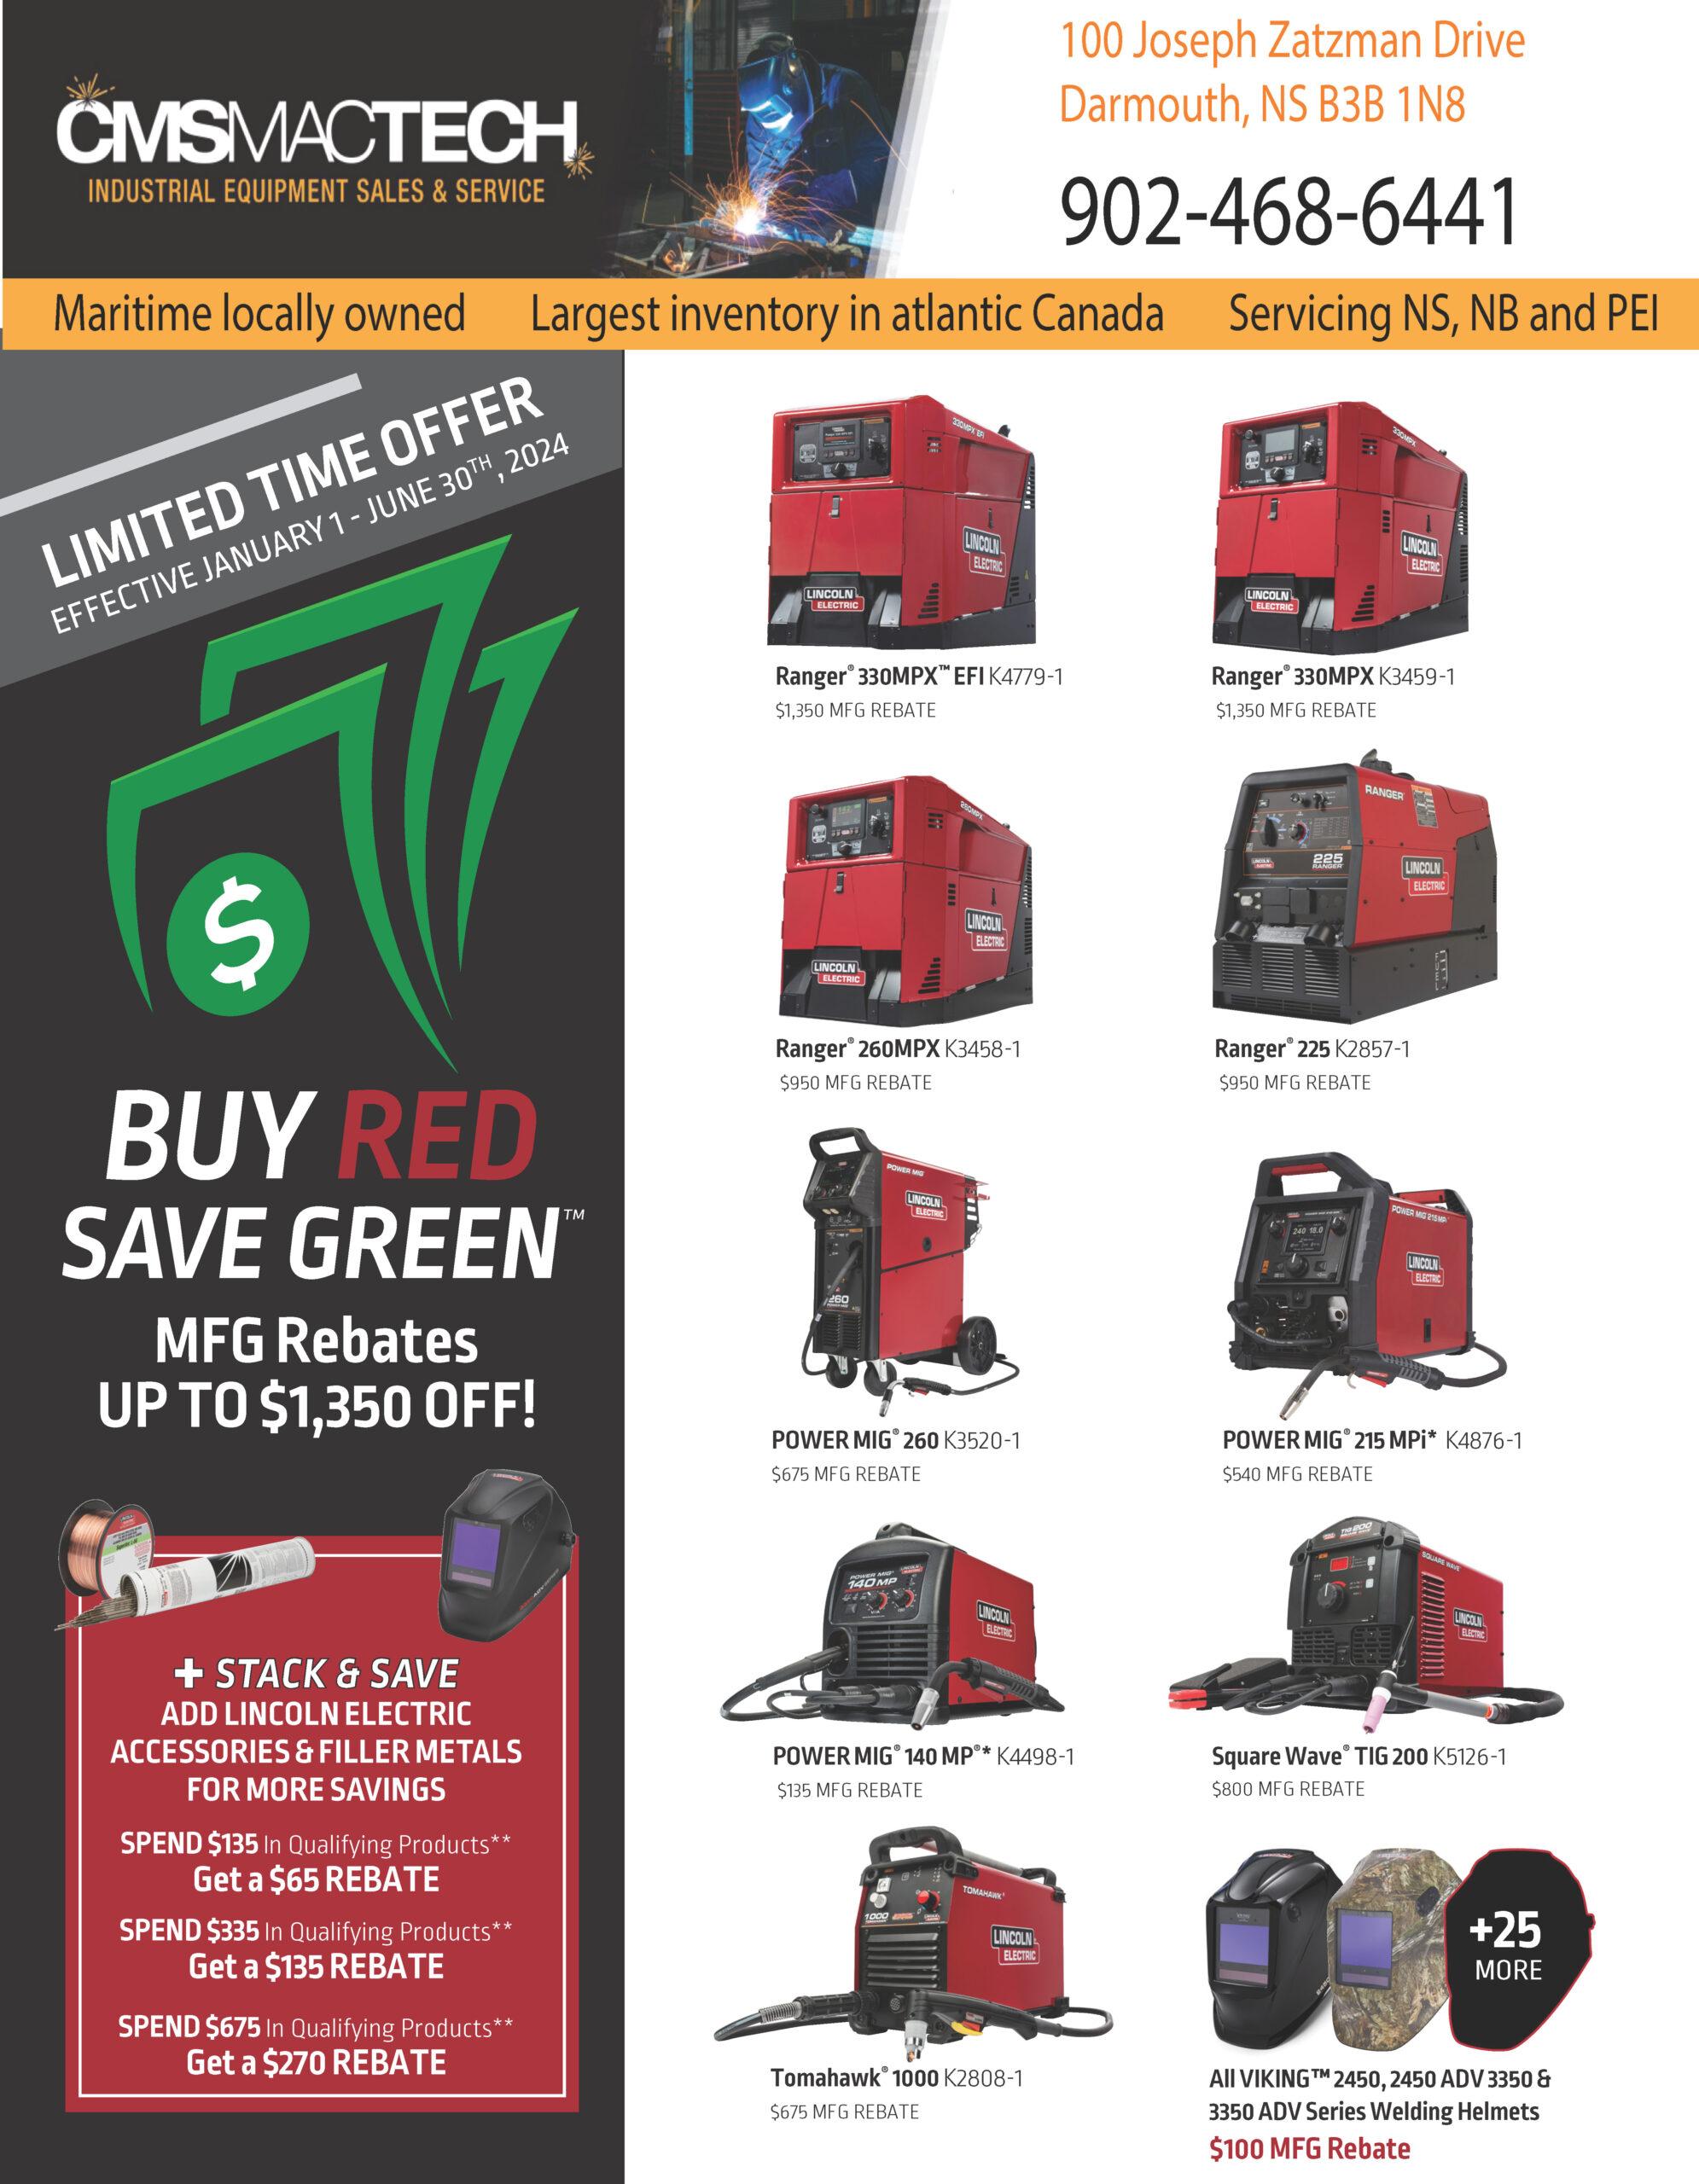 Save on Lincoln Electric Welders!